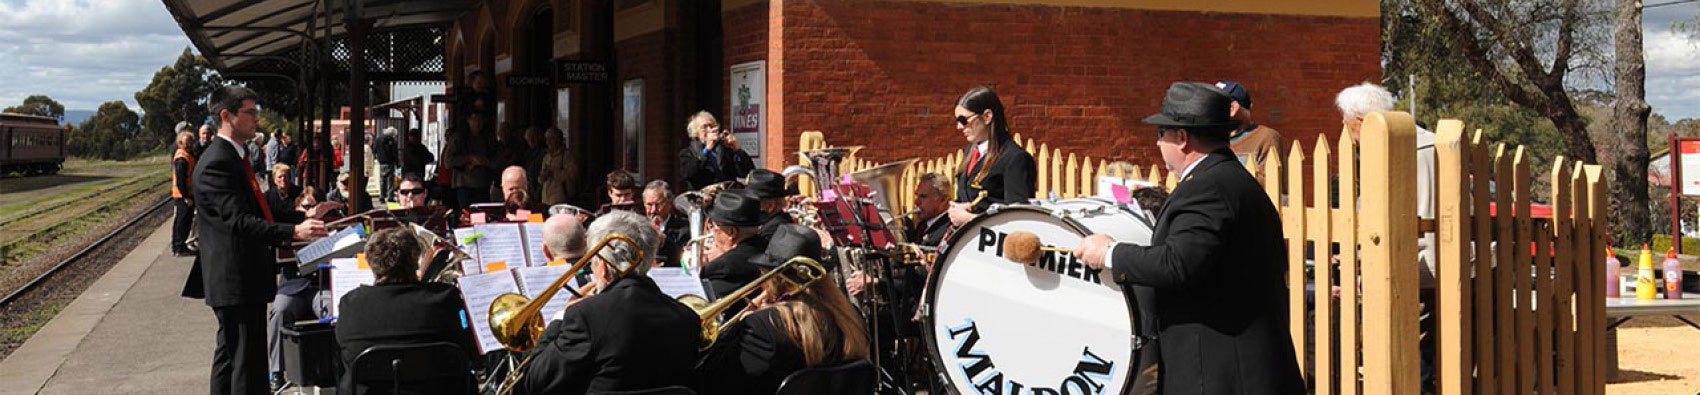 A band of musicians standing on the Maldon Station platform. Some of the musicians have drums and trumpets.